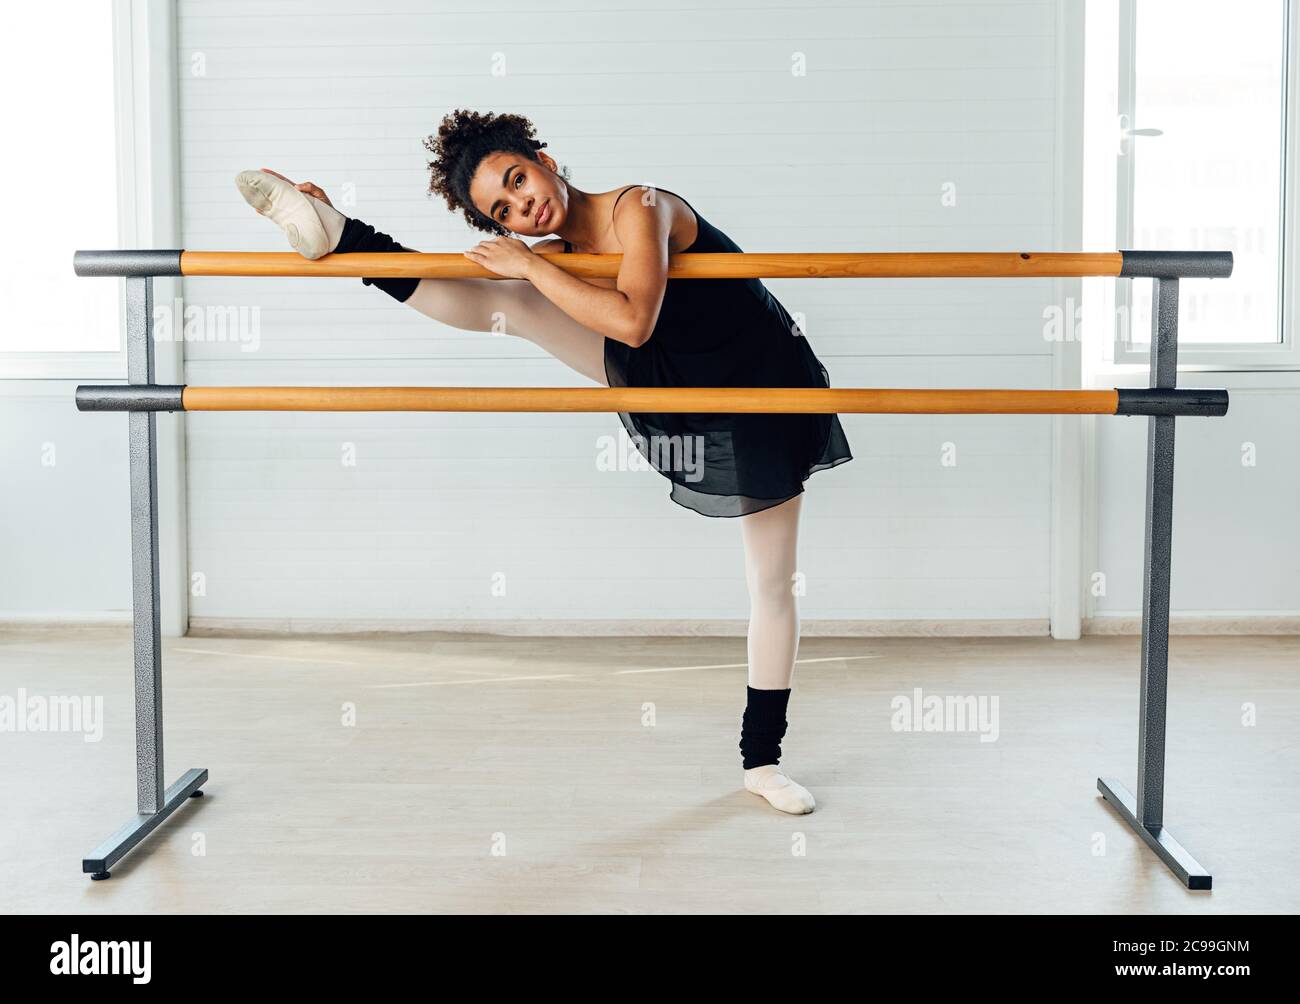 https://c8.alamy.com/comp/2C99GNM/young-ballerina-stretching-her-leg-in-dance-studio-woman-doing-exercise-on-ballet-barre-2C99GNM.jpg